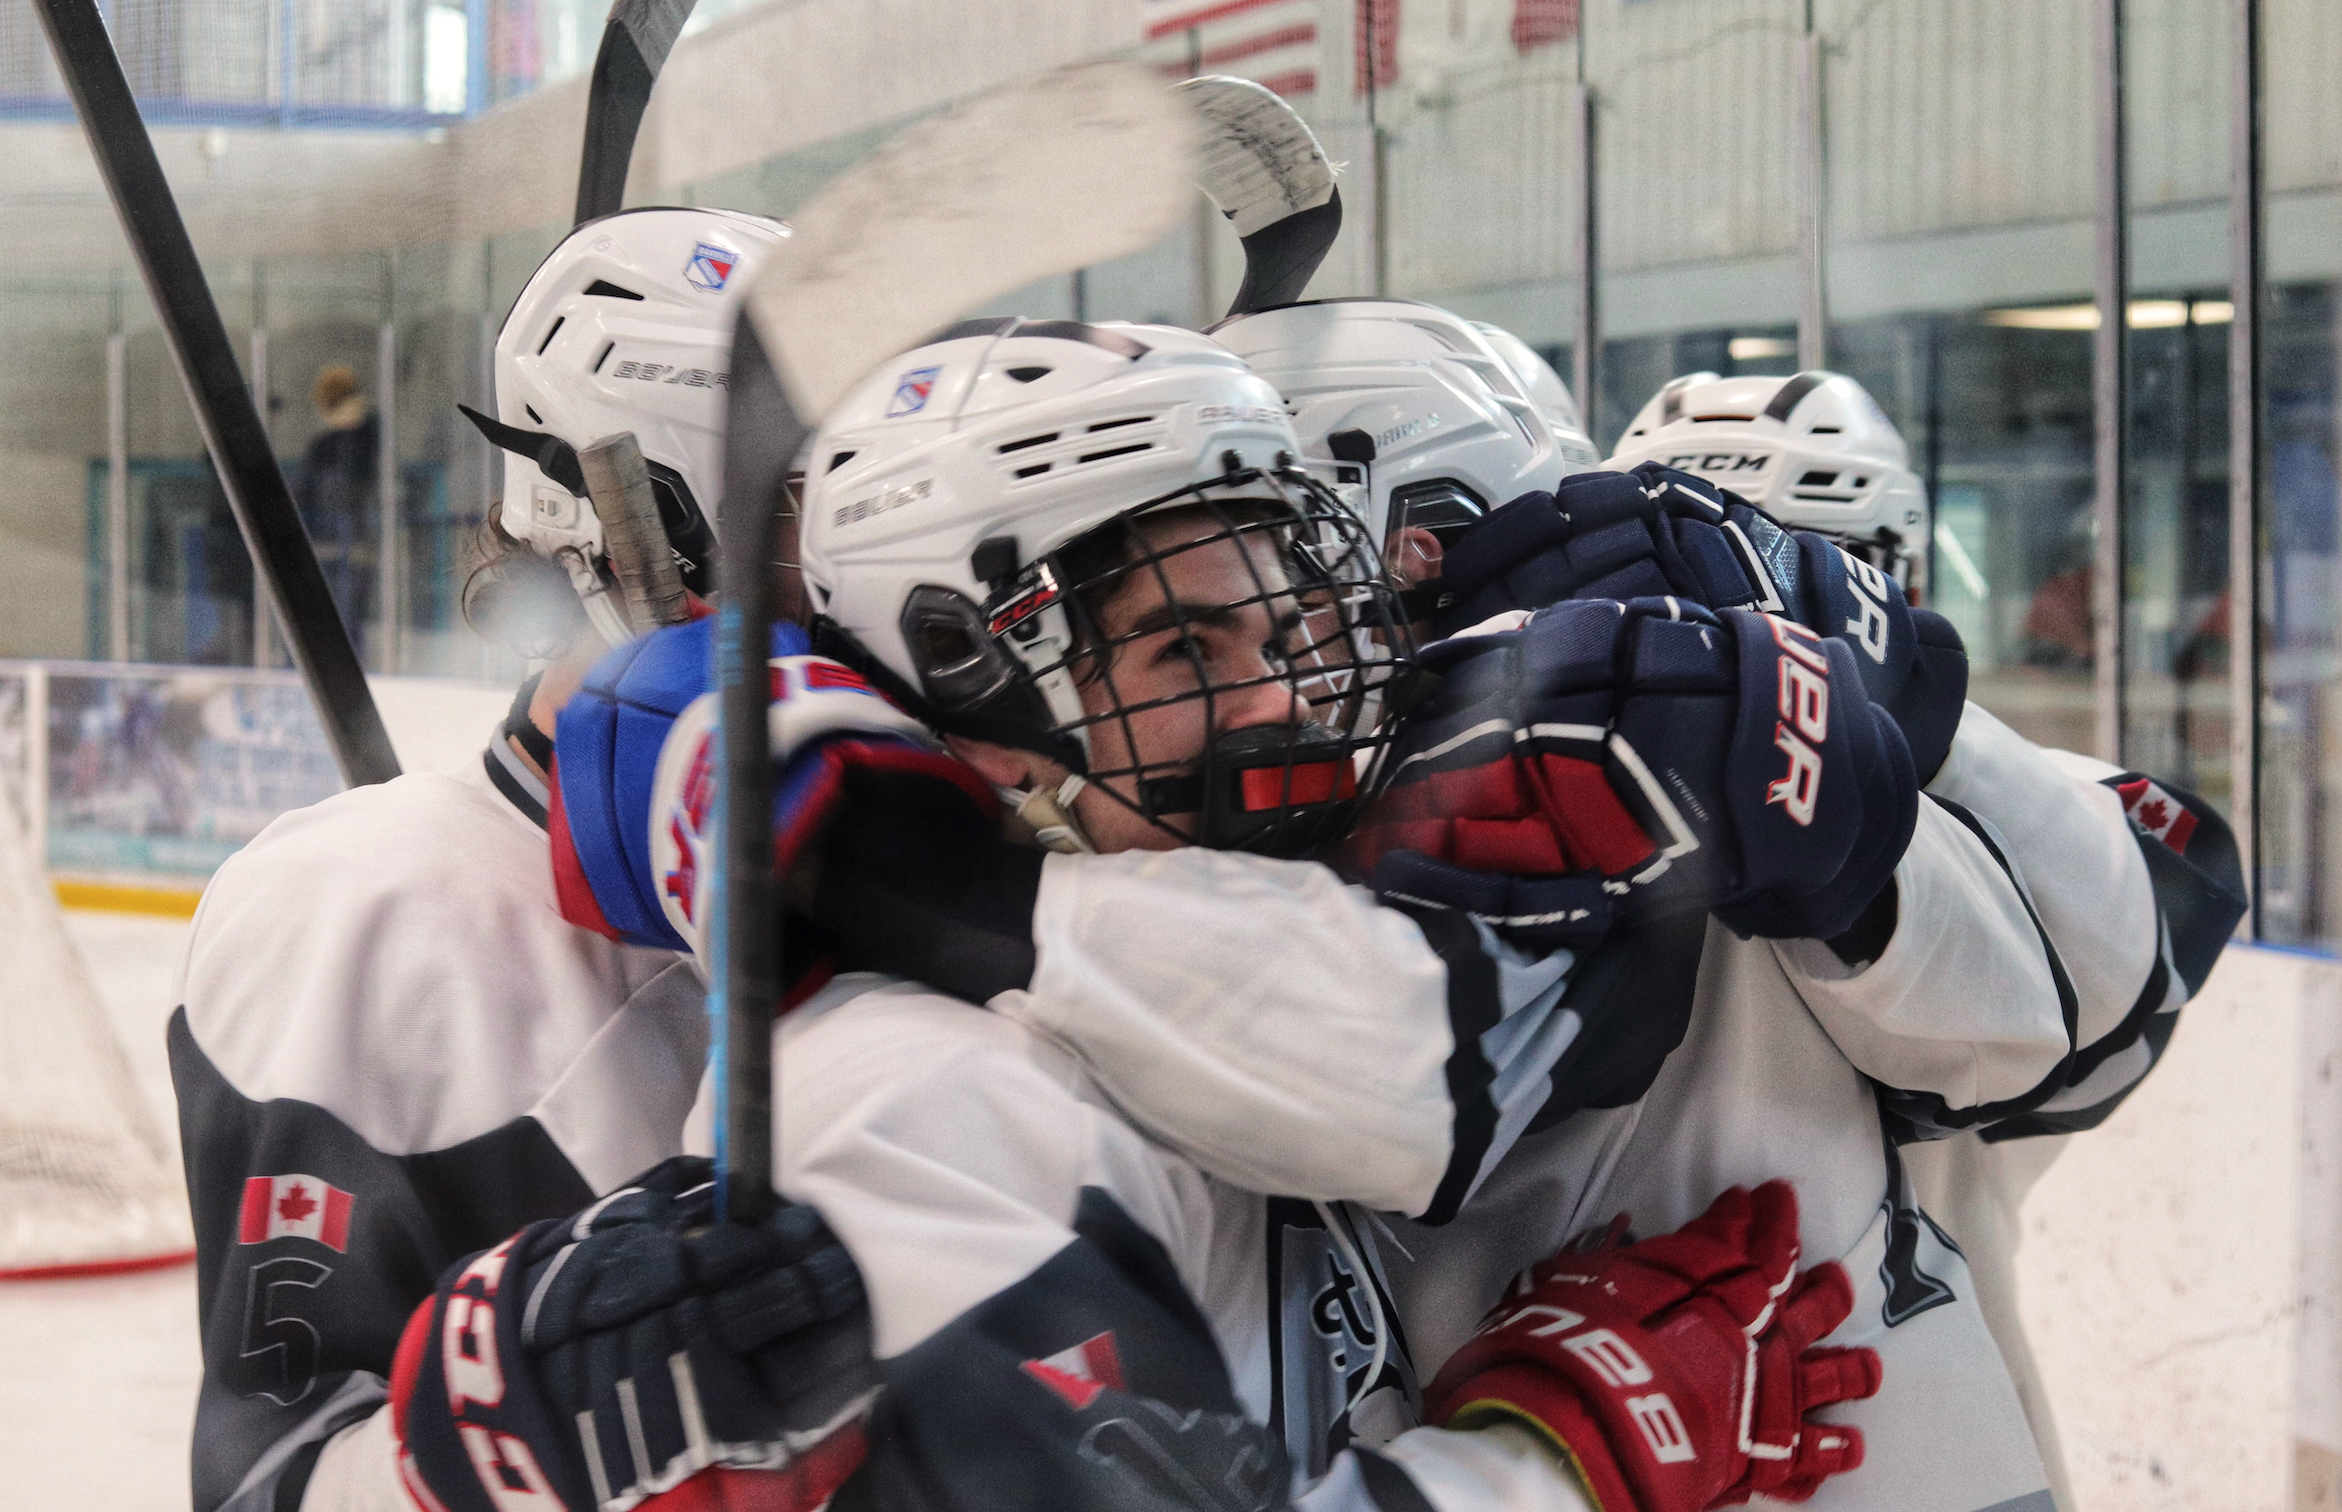 Aquinas players swarm after tying the game up for a second time. | Robby Gray ties the game for a second time, only moments after Bishop Redding took the lead in the second period. | Pierce Lang